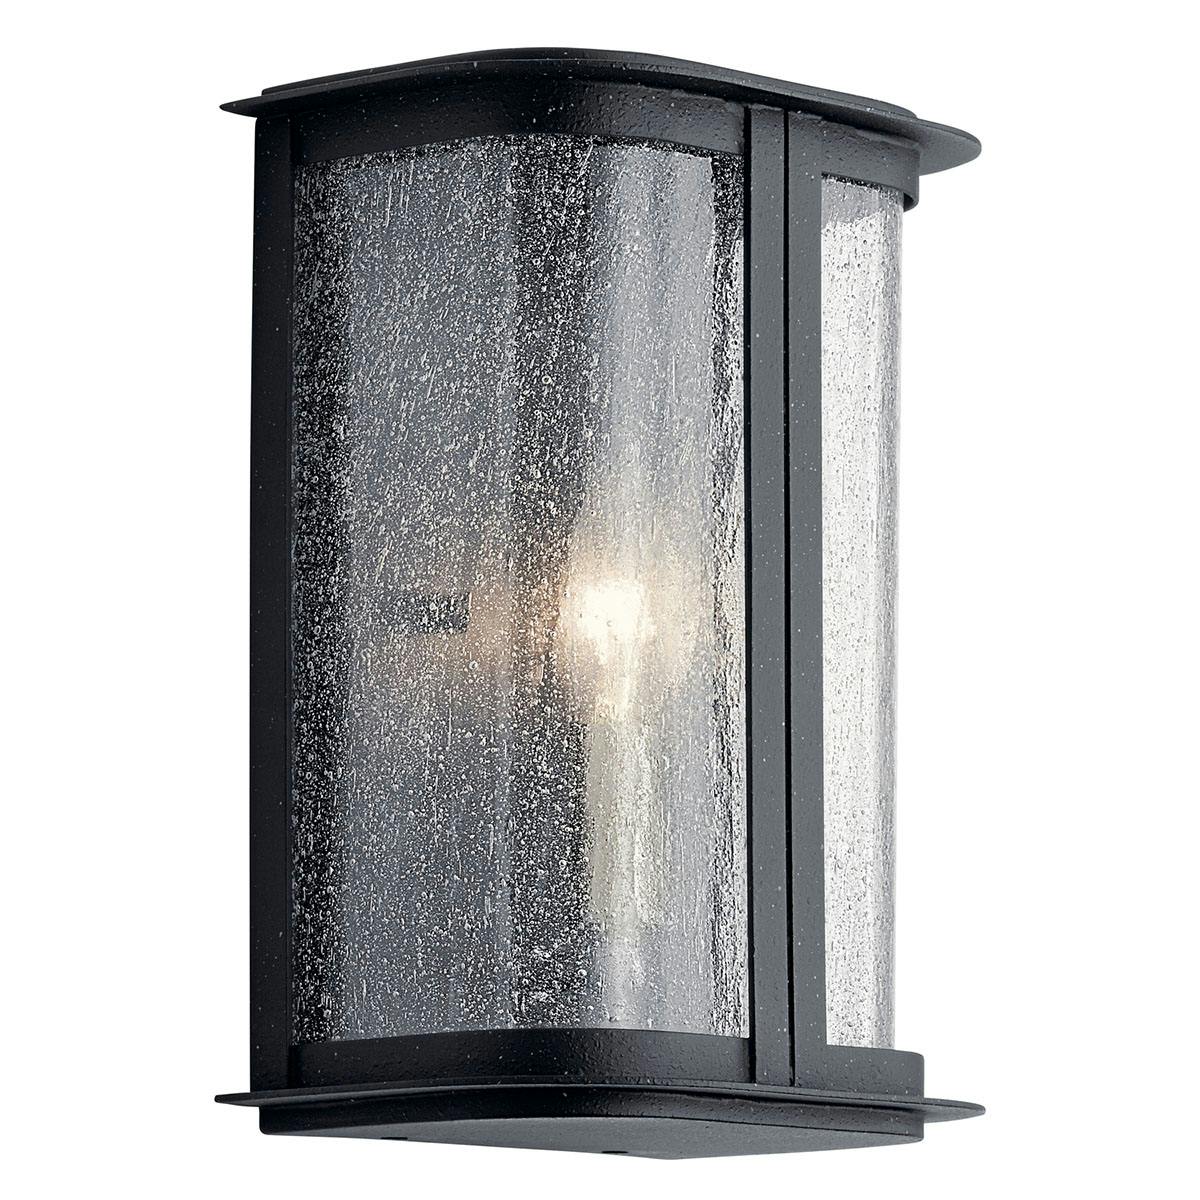 Timmin 10" 1 Light Wall Light Black on a white background